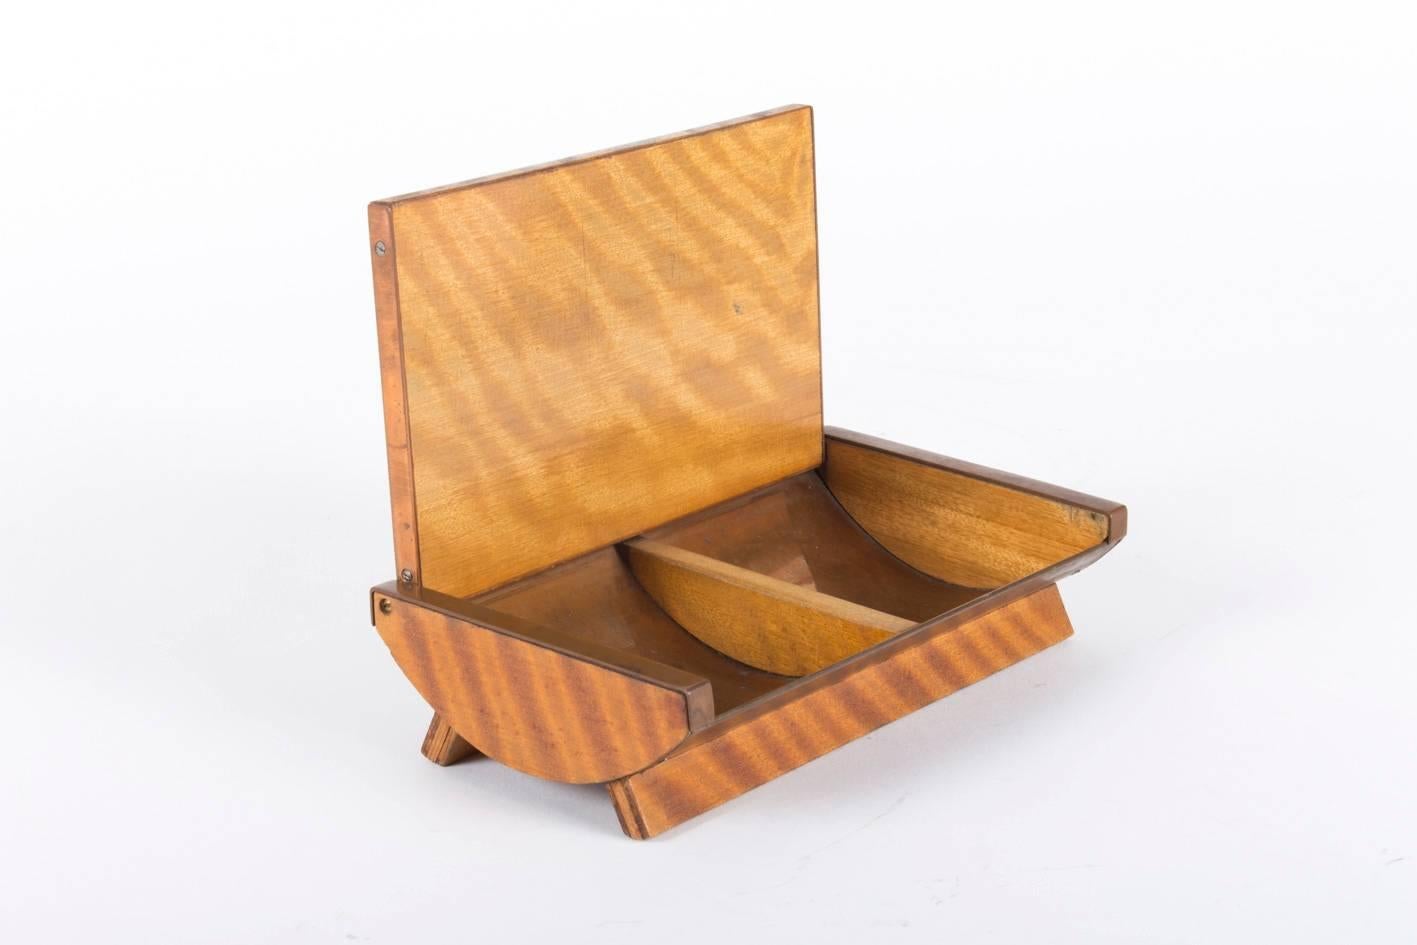 Austrian Rare Mid-Century Jewelry Box by Carl Auböck, Late 1930s For Sale